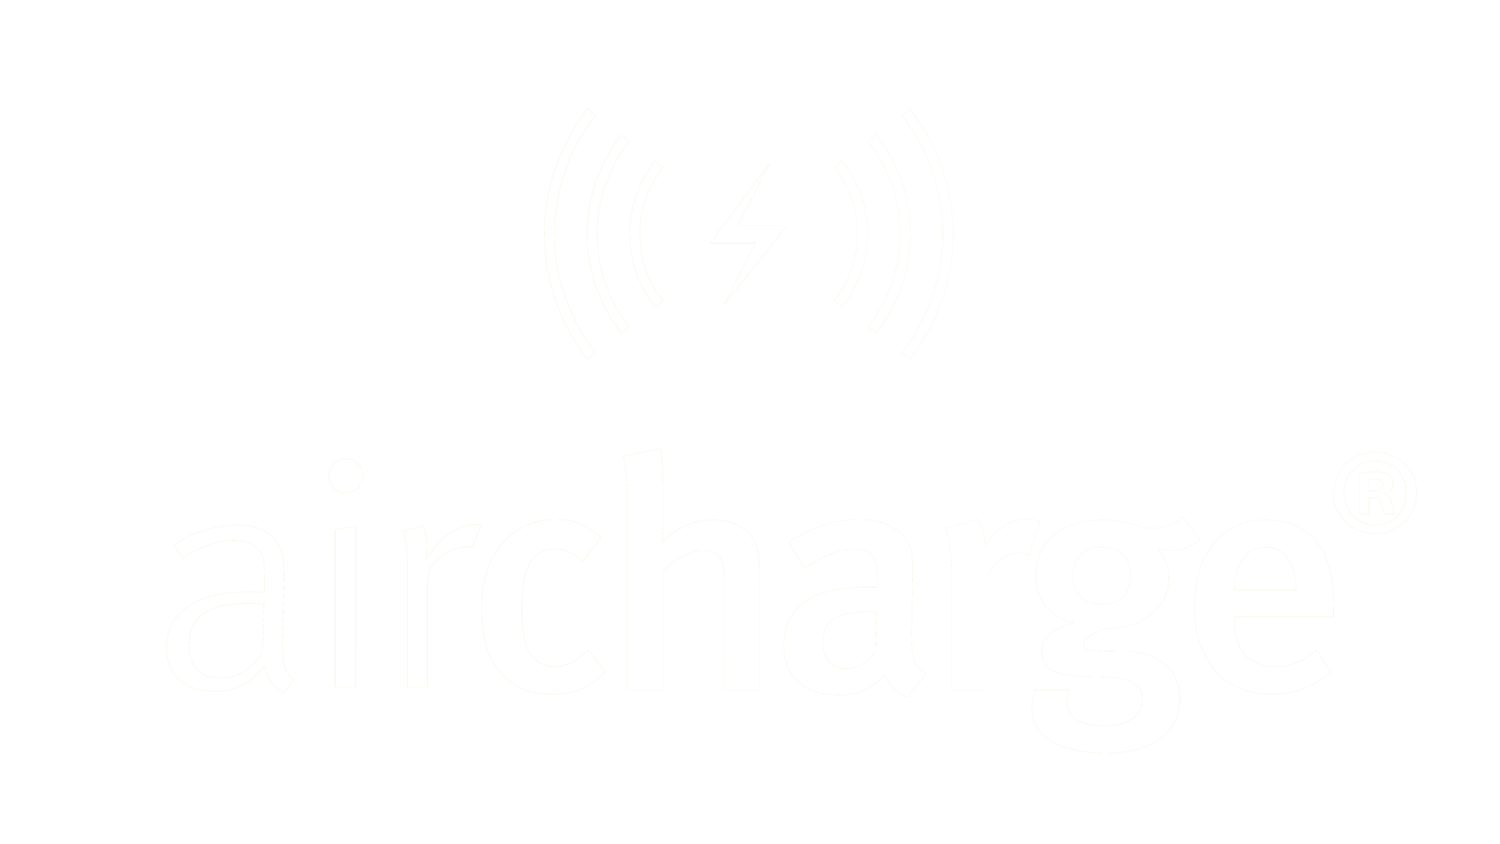 Air-Charge